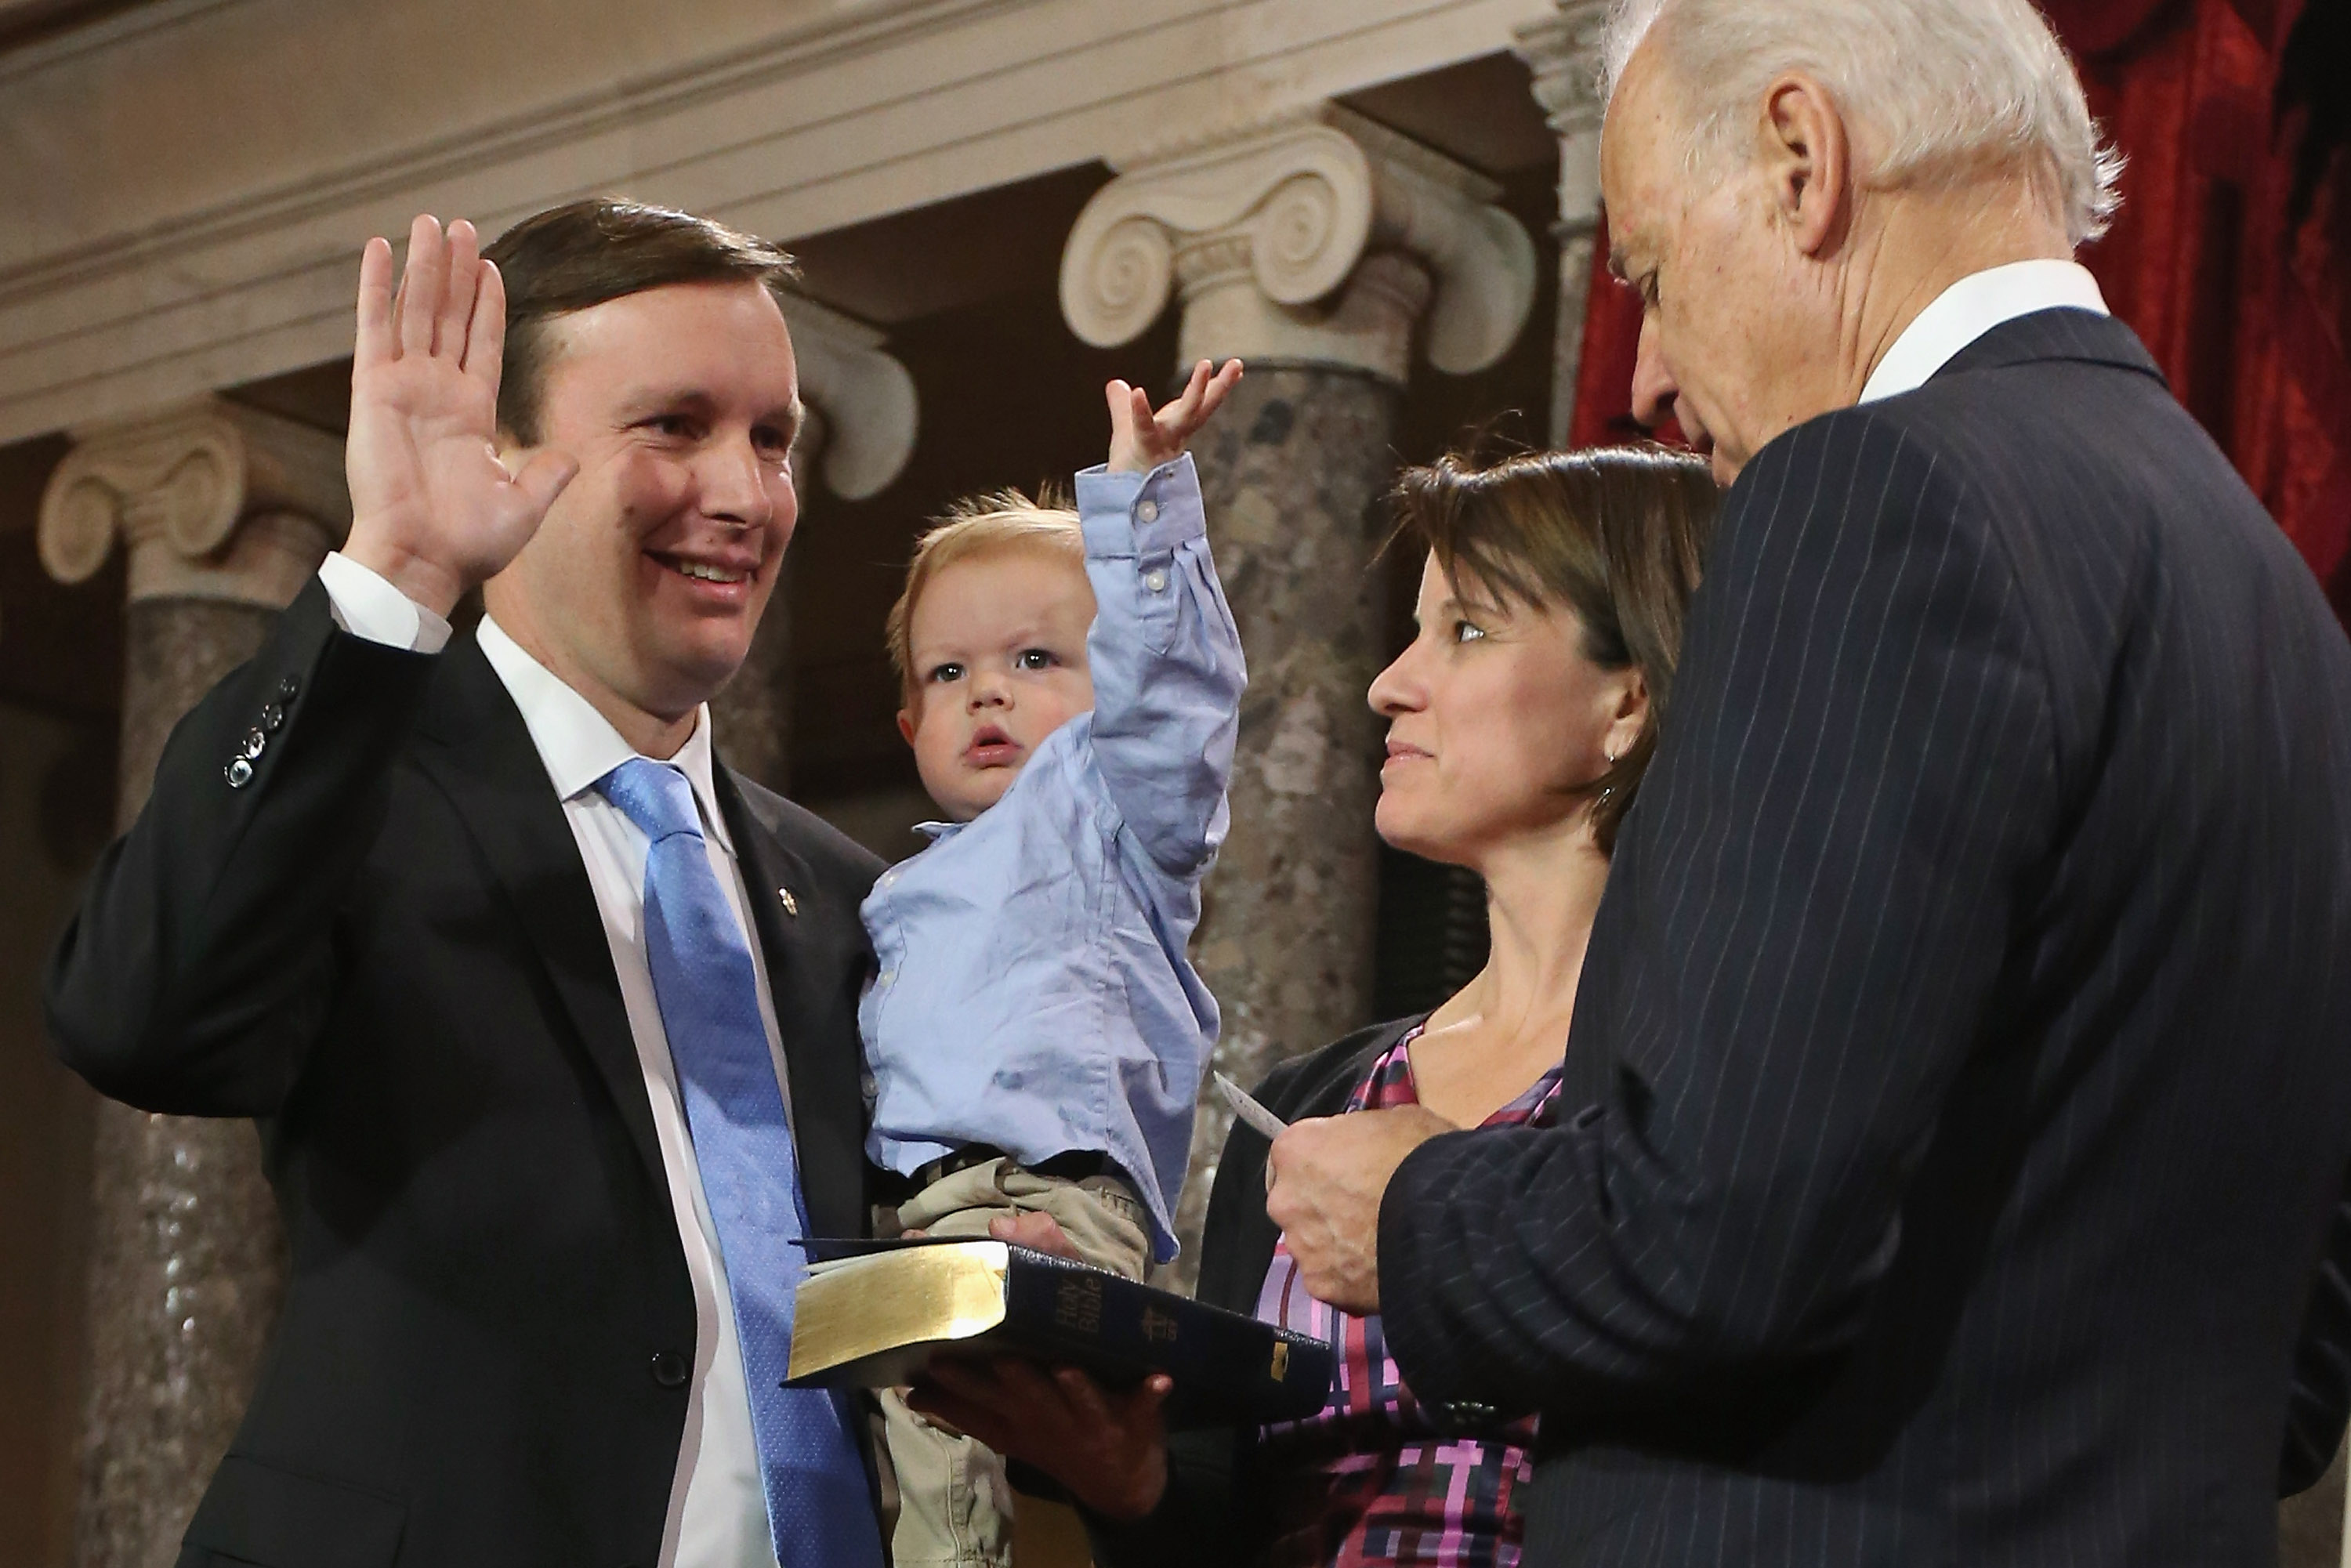 Rider Murphy raises his hand just like his father, U.S. Sen. Chris Murphy (D-CT) (L) as he participates in a reenacted swearing-in with his wife Catherine Murphy and U.S. Vice President Joe Biden in the Old Senate Chamber at the U.S. Capitol January 3, 2013 (Chip Somodevilla—Getty Images)